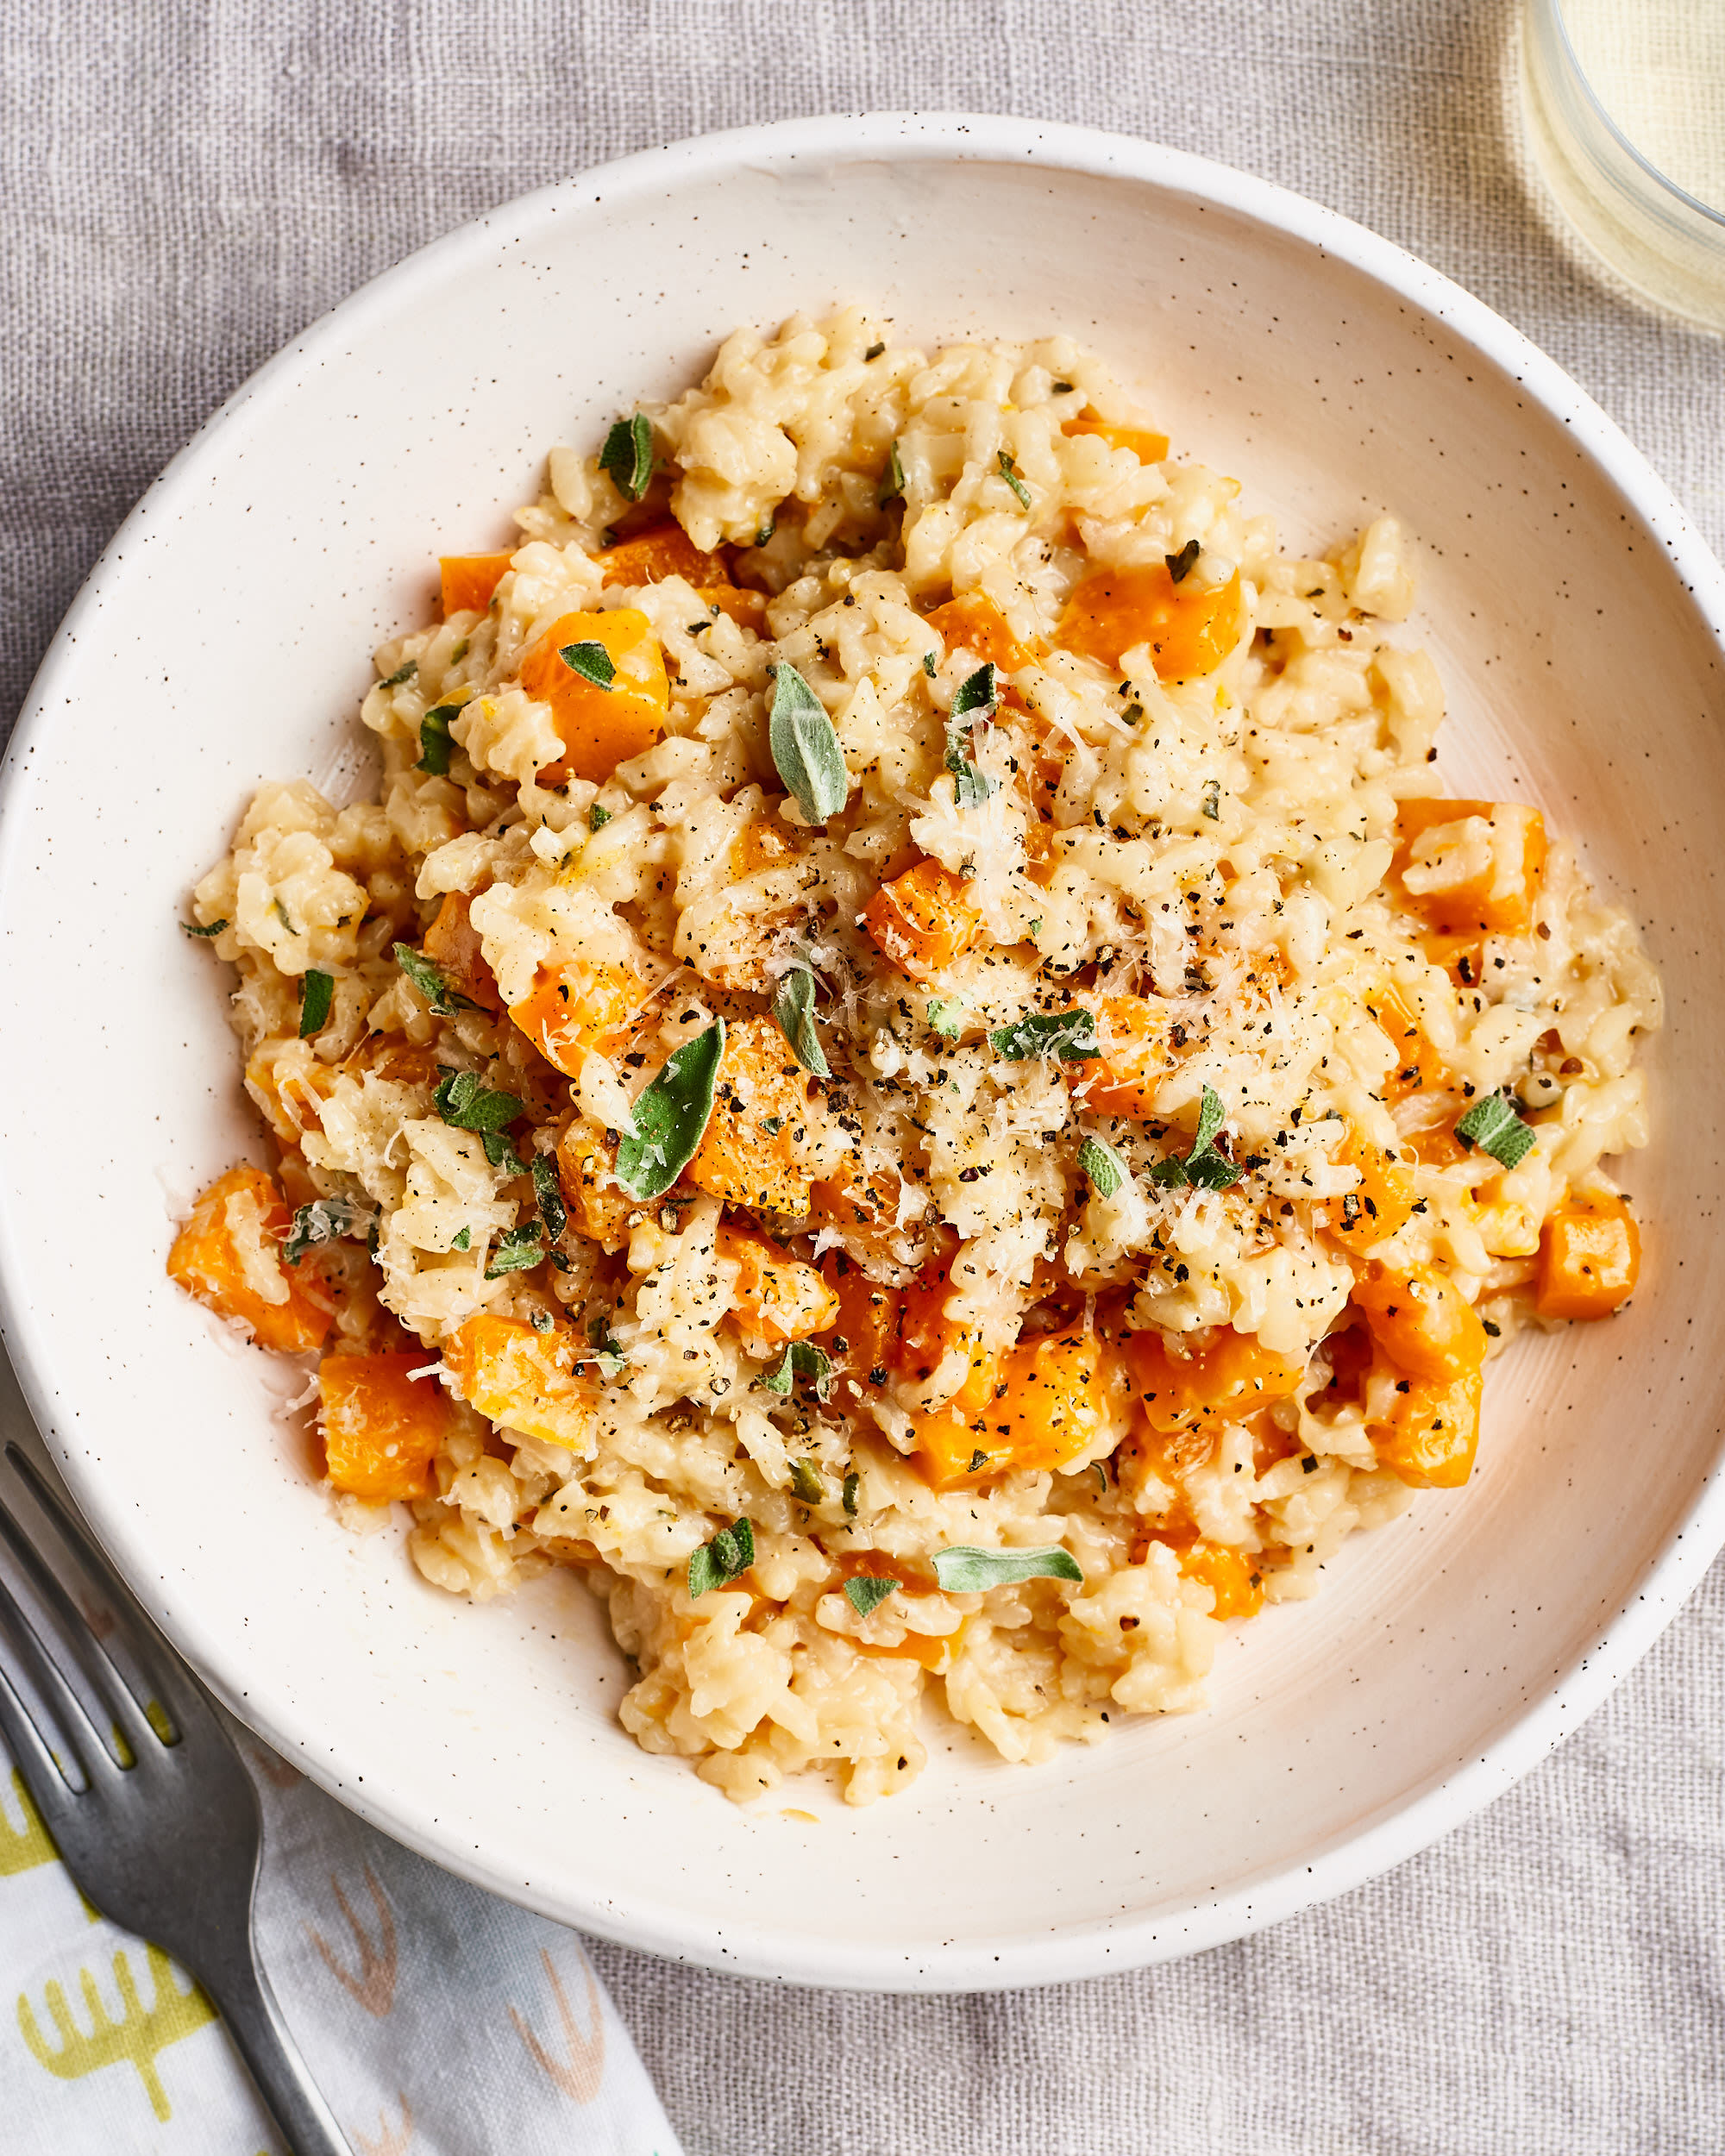 Beyond Arborio Rice: 7 Risotto Recipes Made with Whole Grains | Kitchn